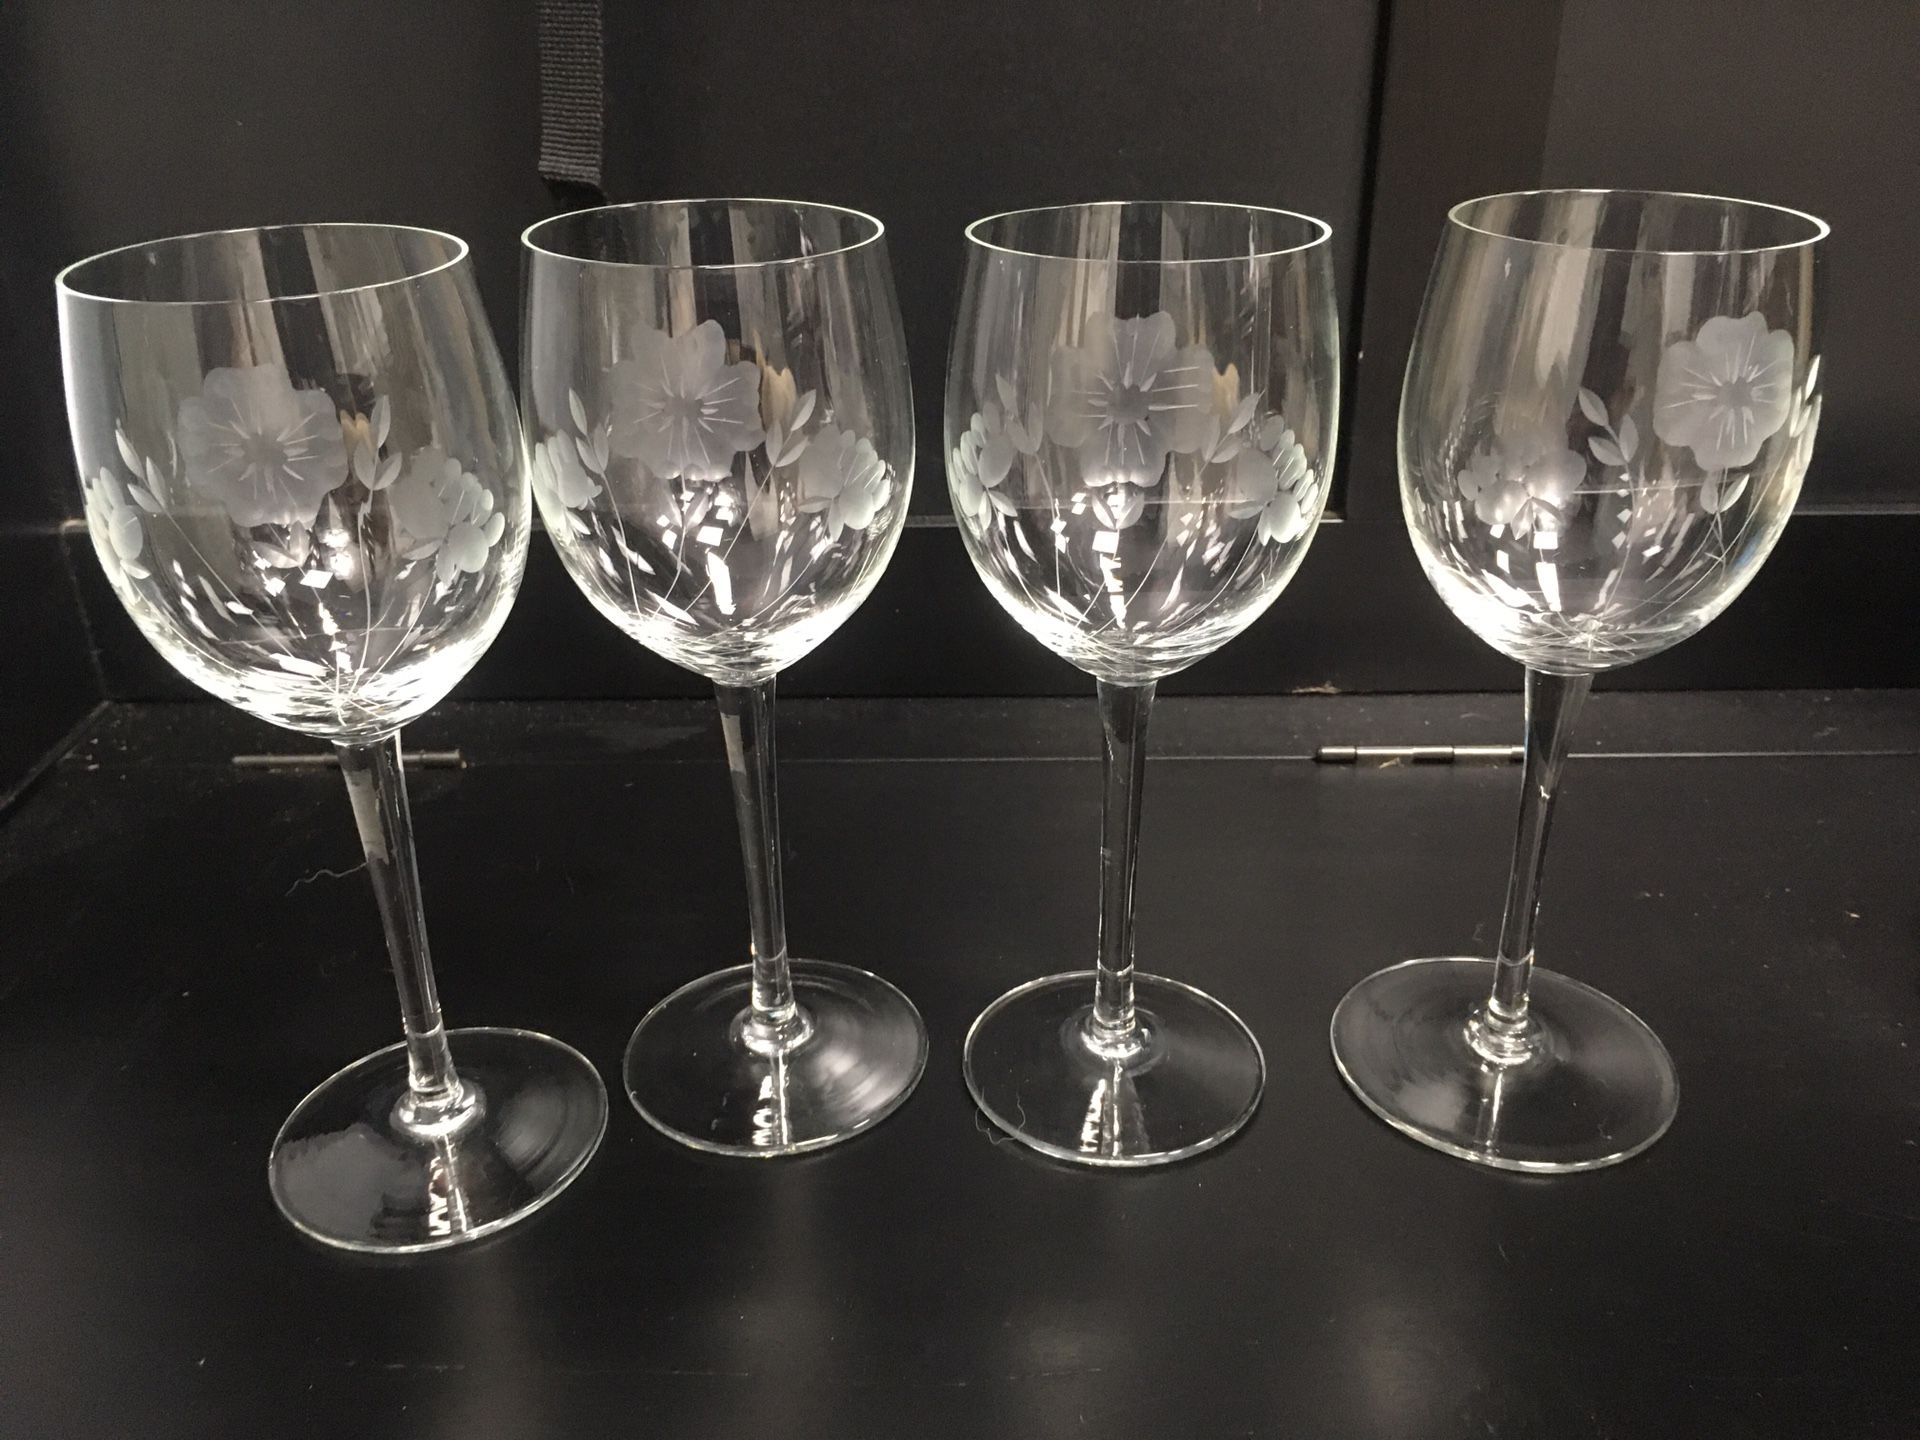 Beautiful floral etched wine glasses